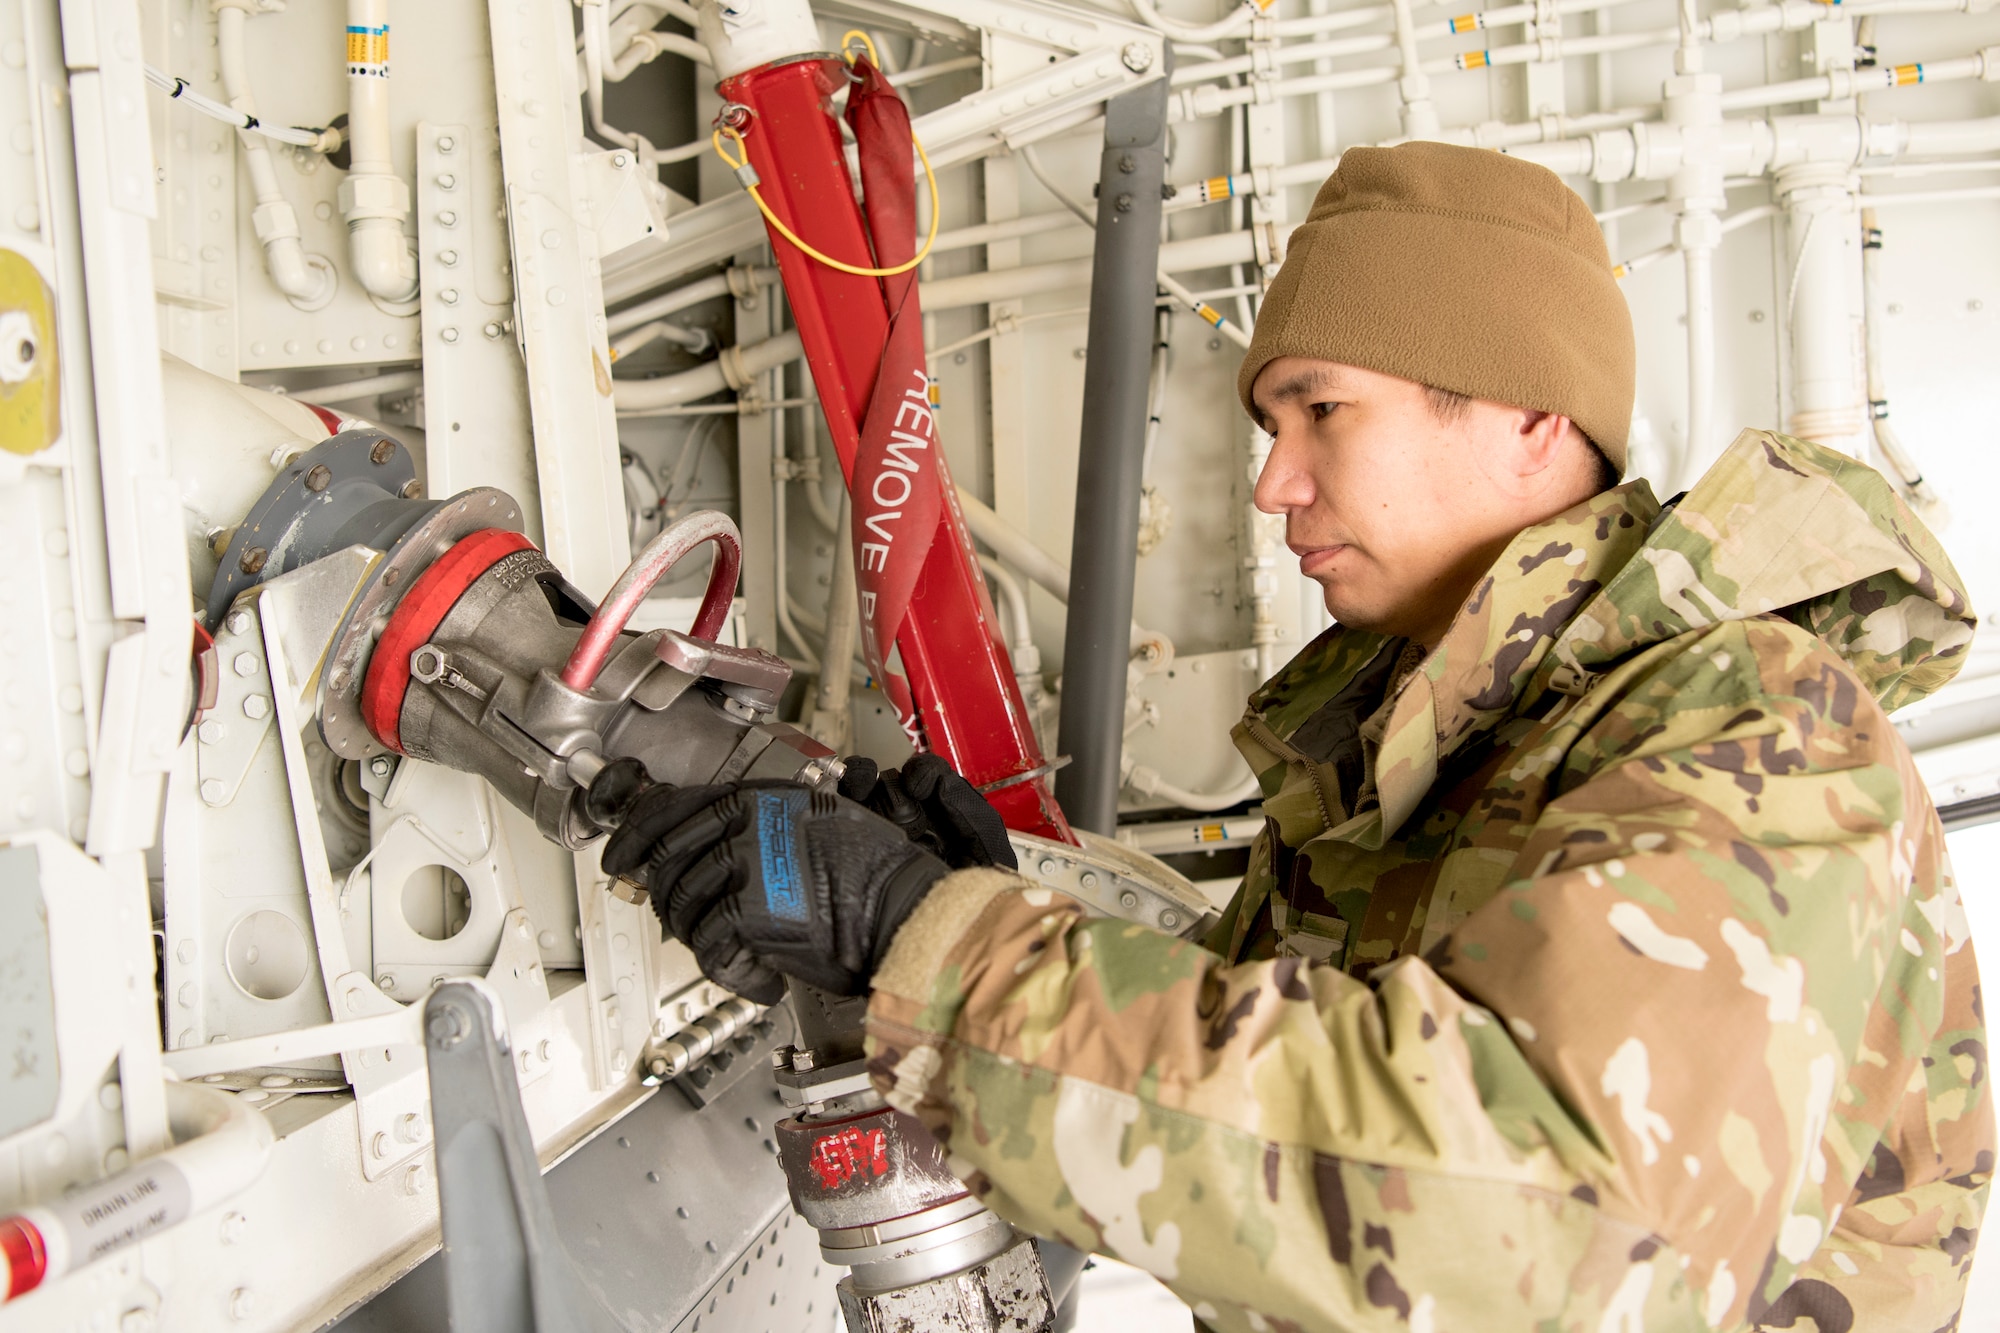 Tech. Sgt. David Taylor, 434th Aircraft Maintenance Squadron crew chief, fuels a KC-135R Stratotanker at Grissom Air Reserve Base, Indiana March 20, 2020. The tanker along with three other tankers are preparing to deploy to Southwest Asia in support of Air Force Central Command combat operations. (U.S. Air Force photo/Master Sgt. Ben Mota)